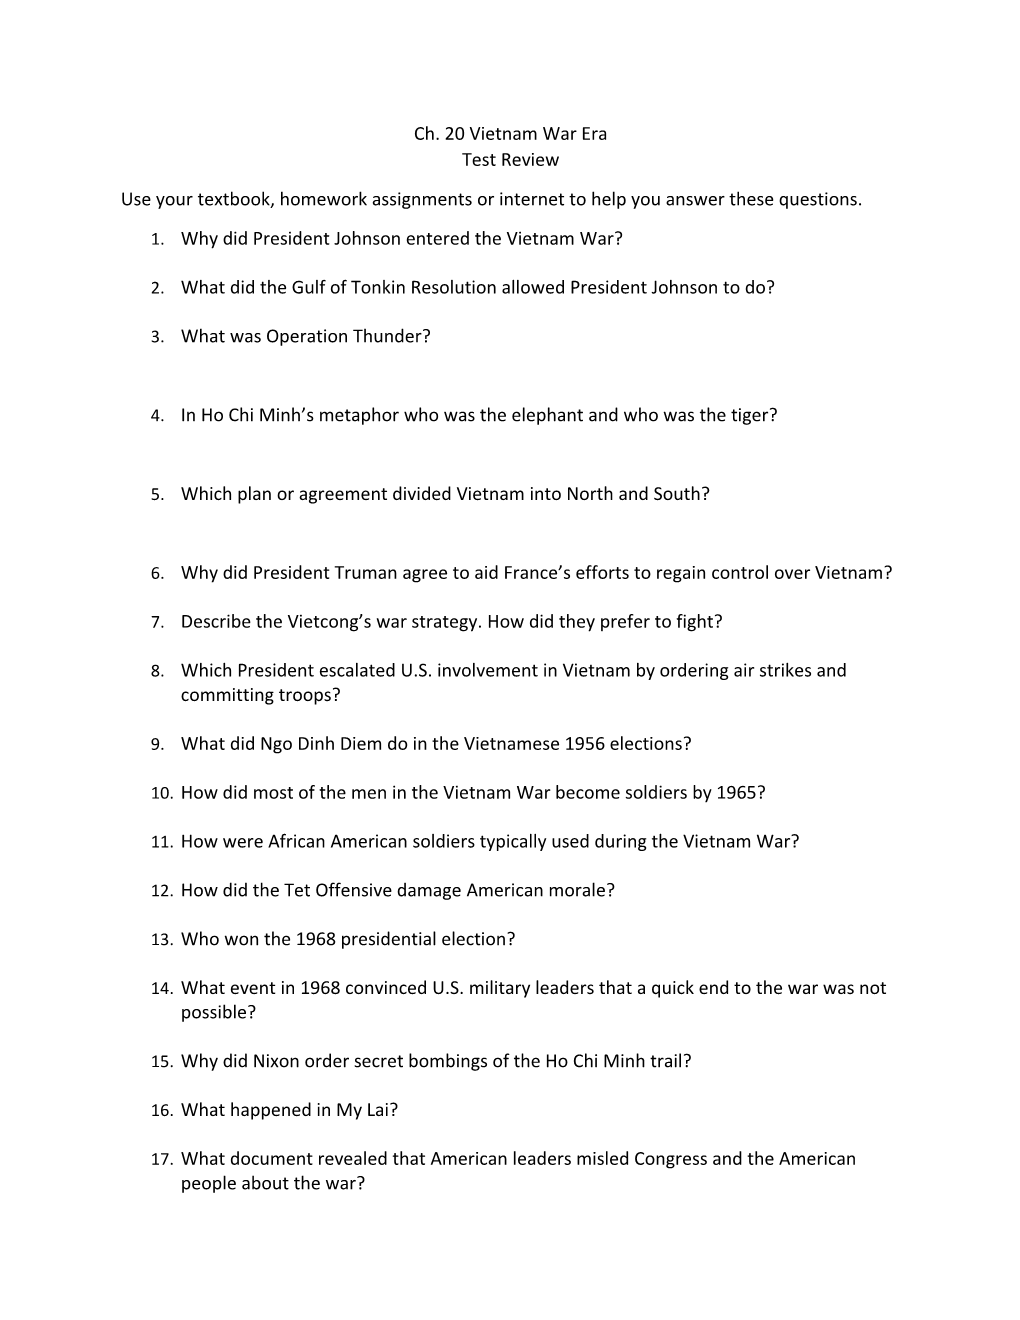 Use Your Textbook, Homework Assignments Or Internet to Help You Answer These Questions